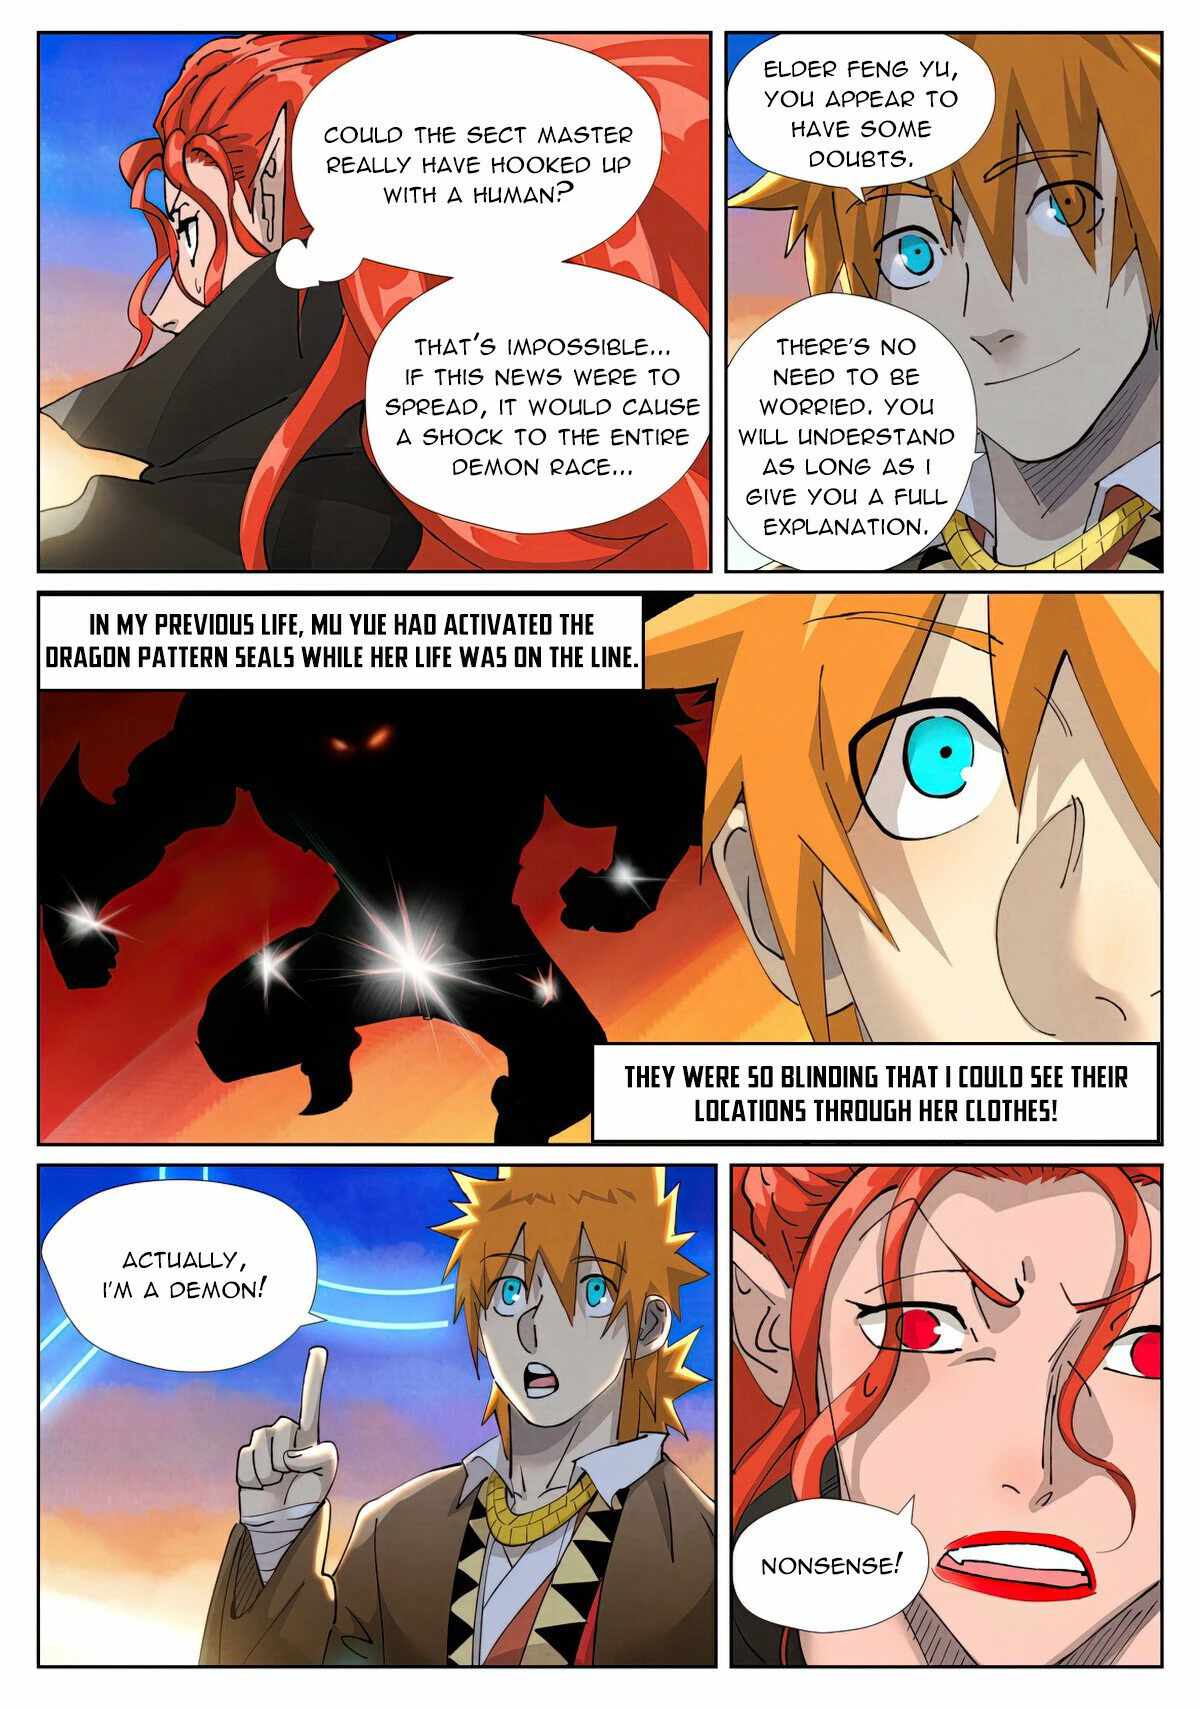 Tales of Demons and Gods Chapter 440-6-eng-li - Page 6